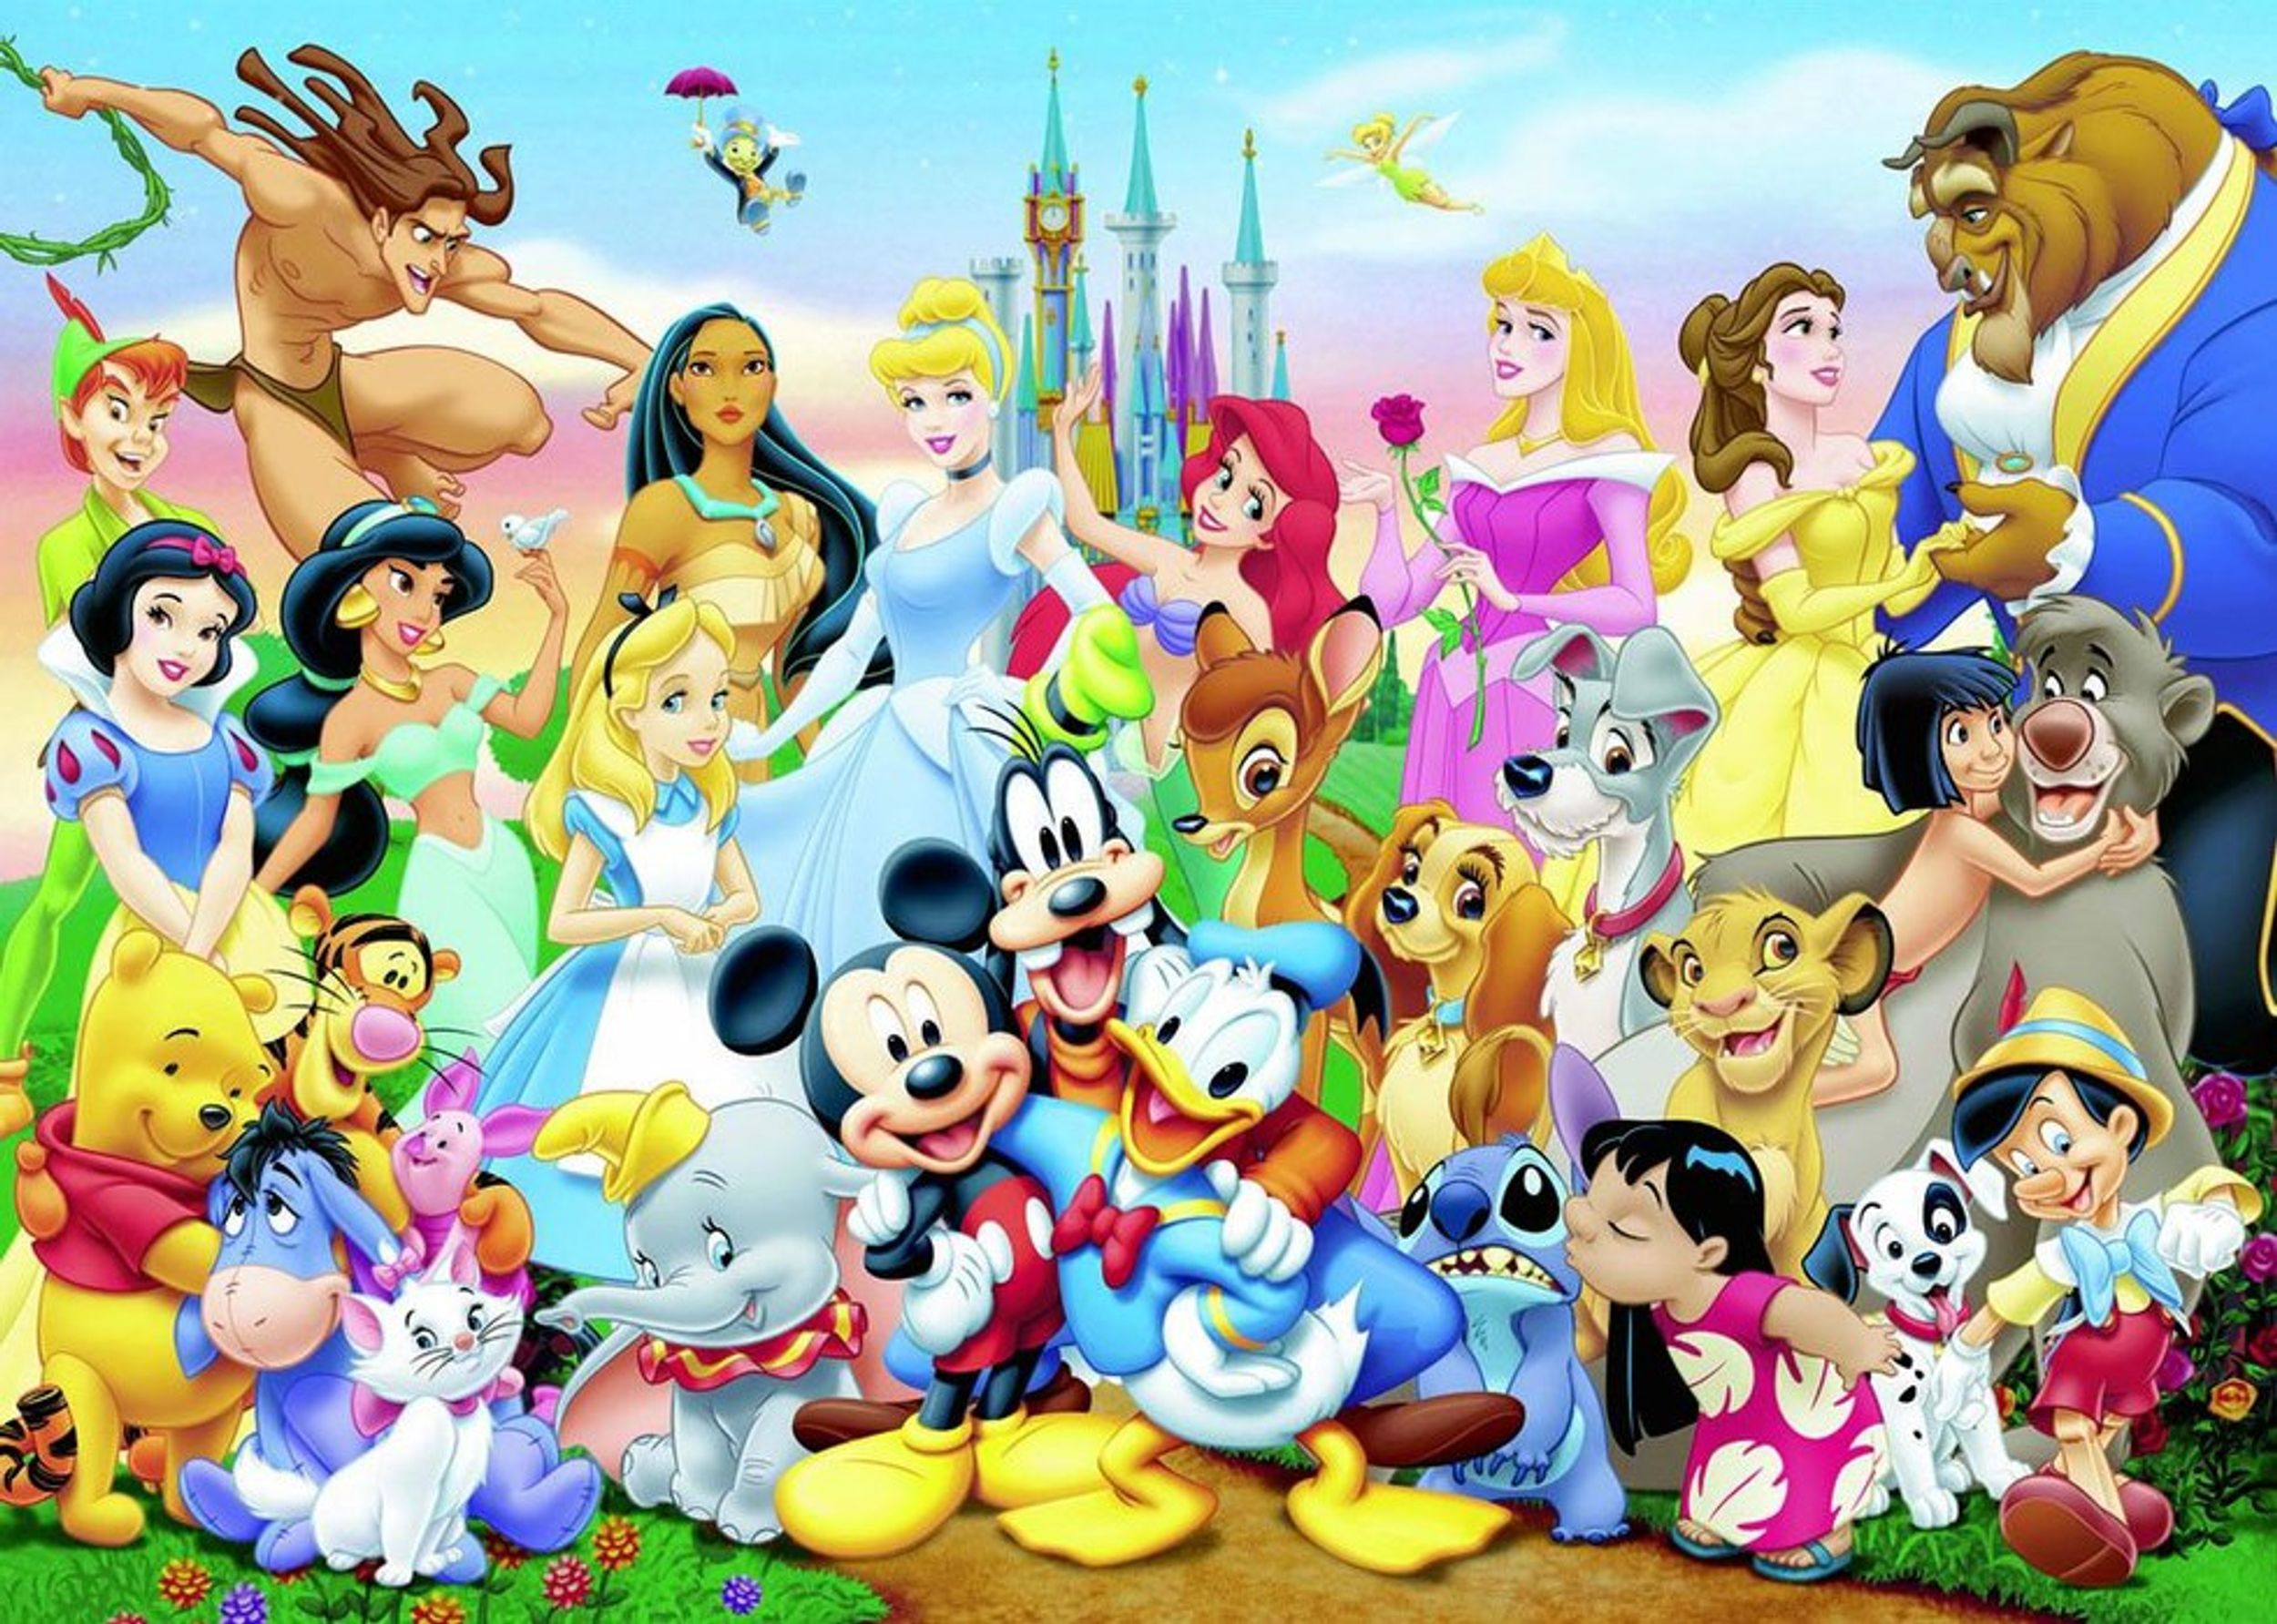 Top 10 Disney Songs To Sing Along To